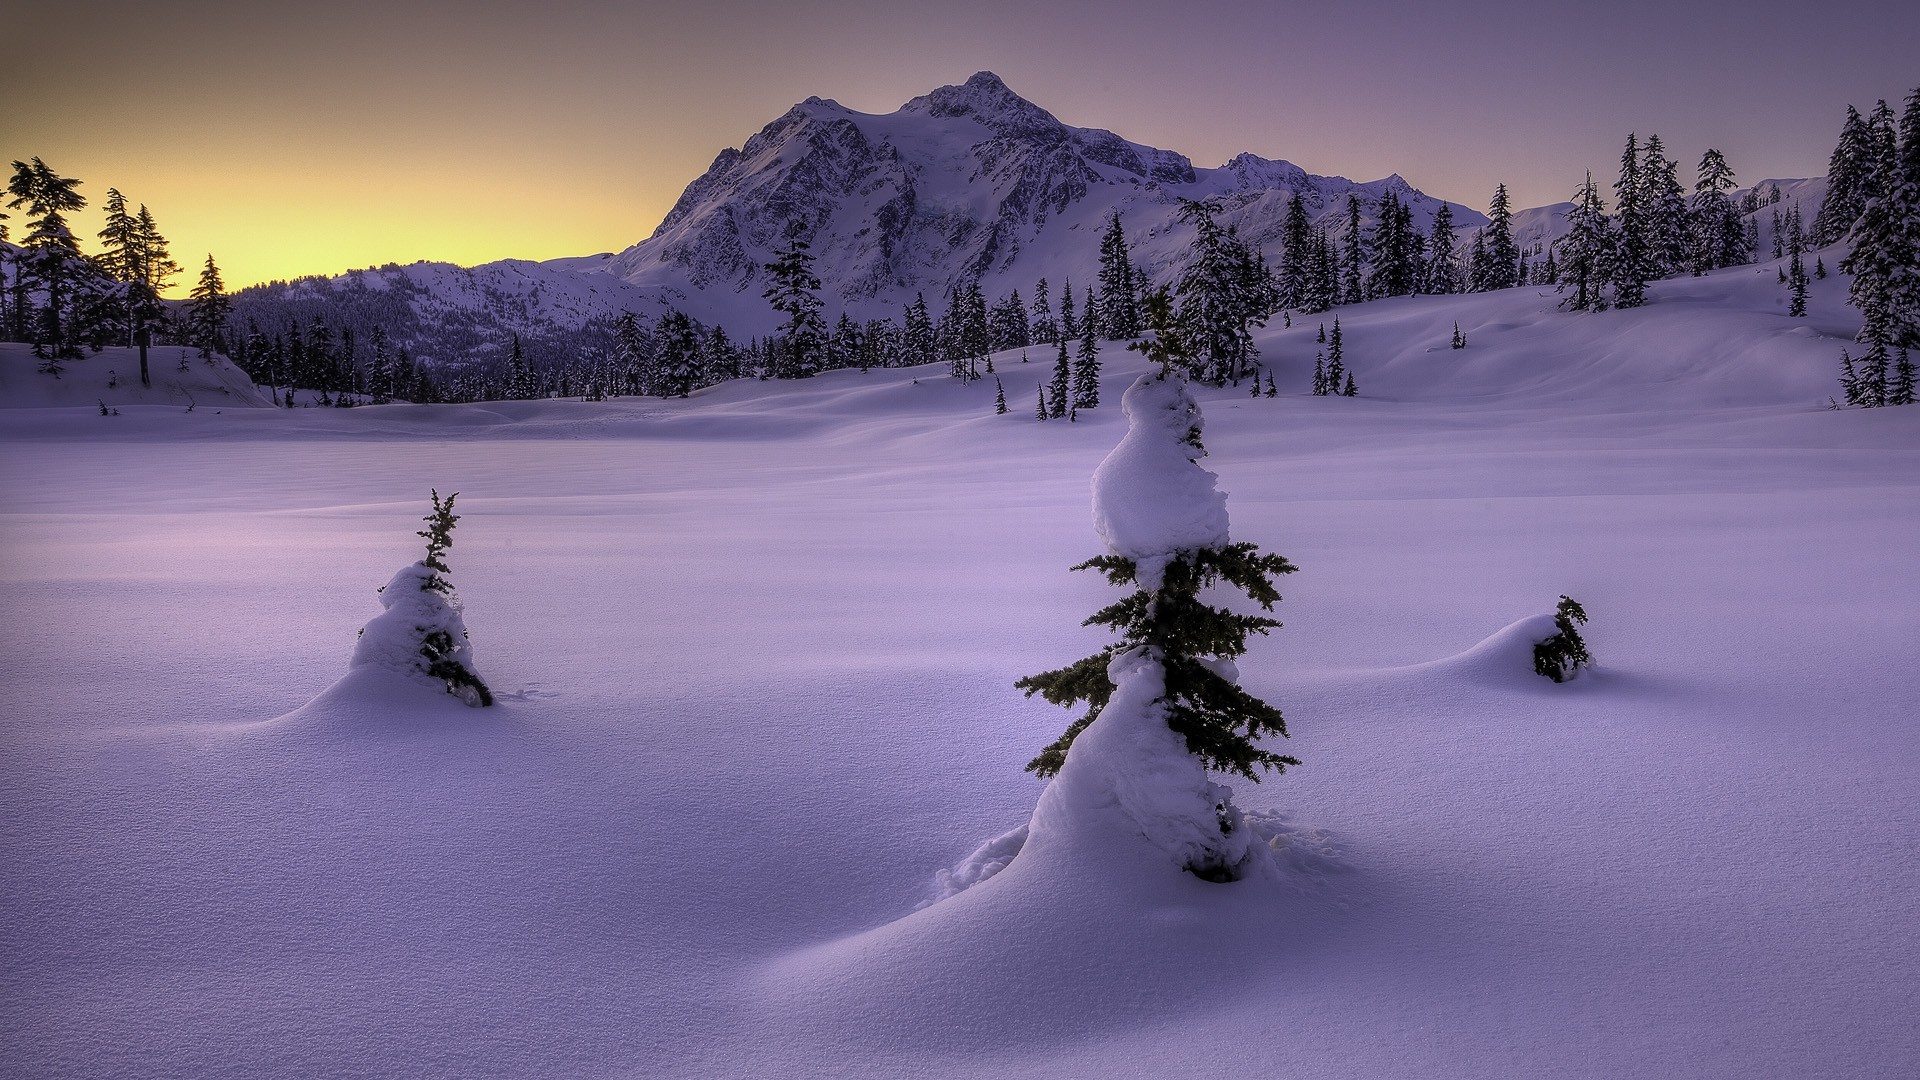 General 1920x1080 cold snow mountains trees sunset nature winter